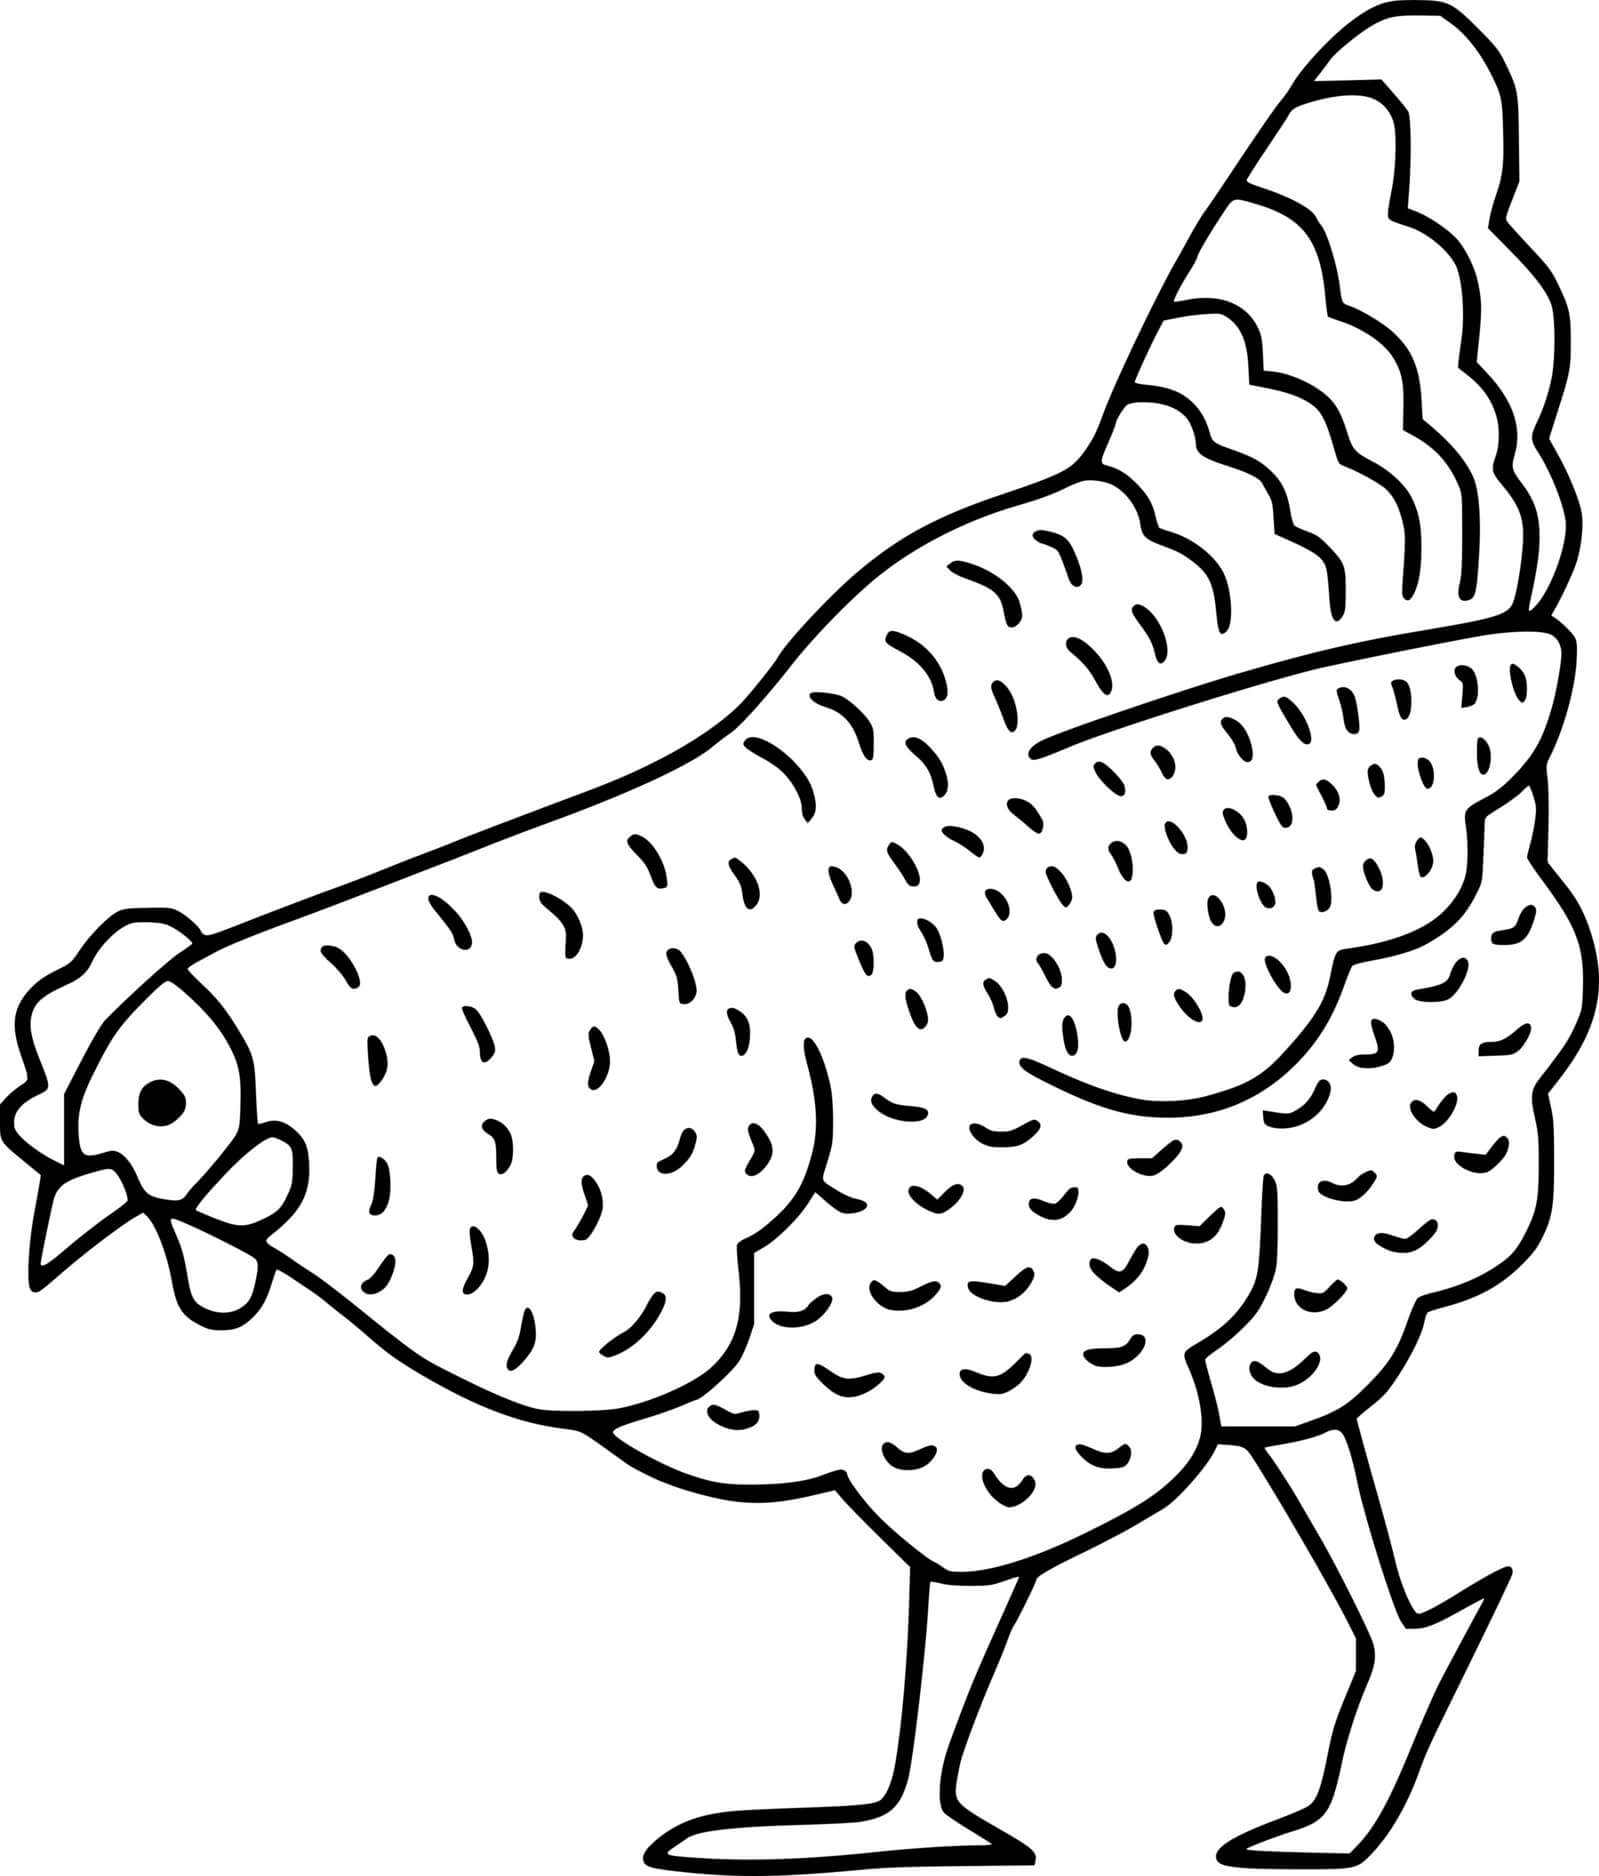 Hen Finding Food Coloring Page